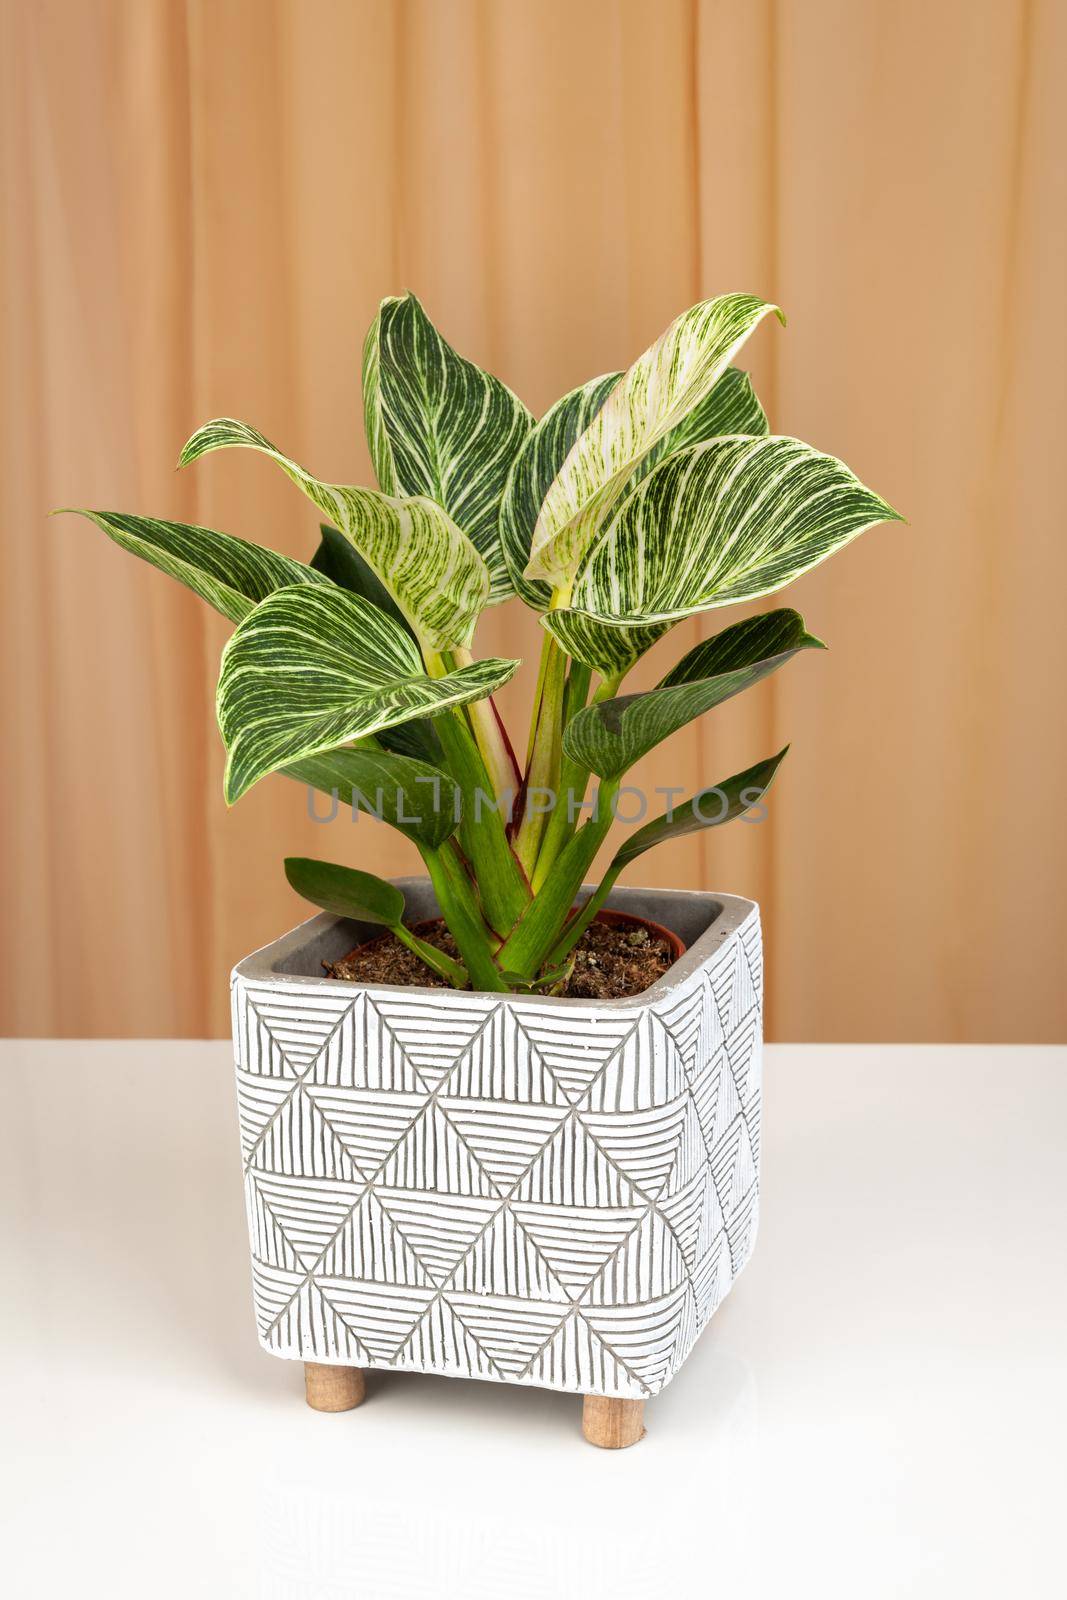 Philodendron Birkin house plant in white textured pot on a fabric curtains background.